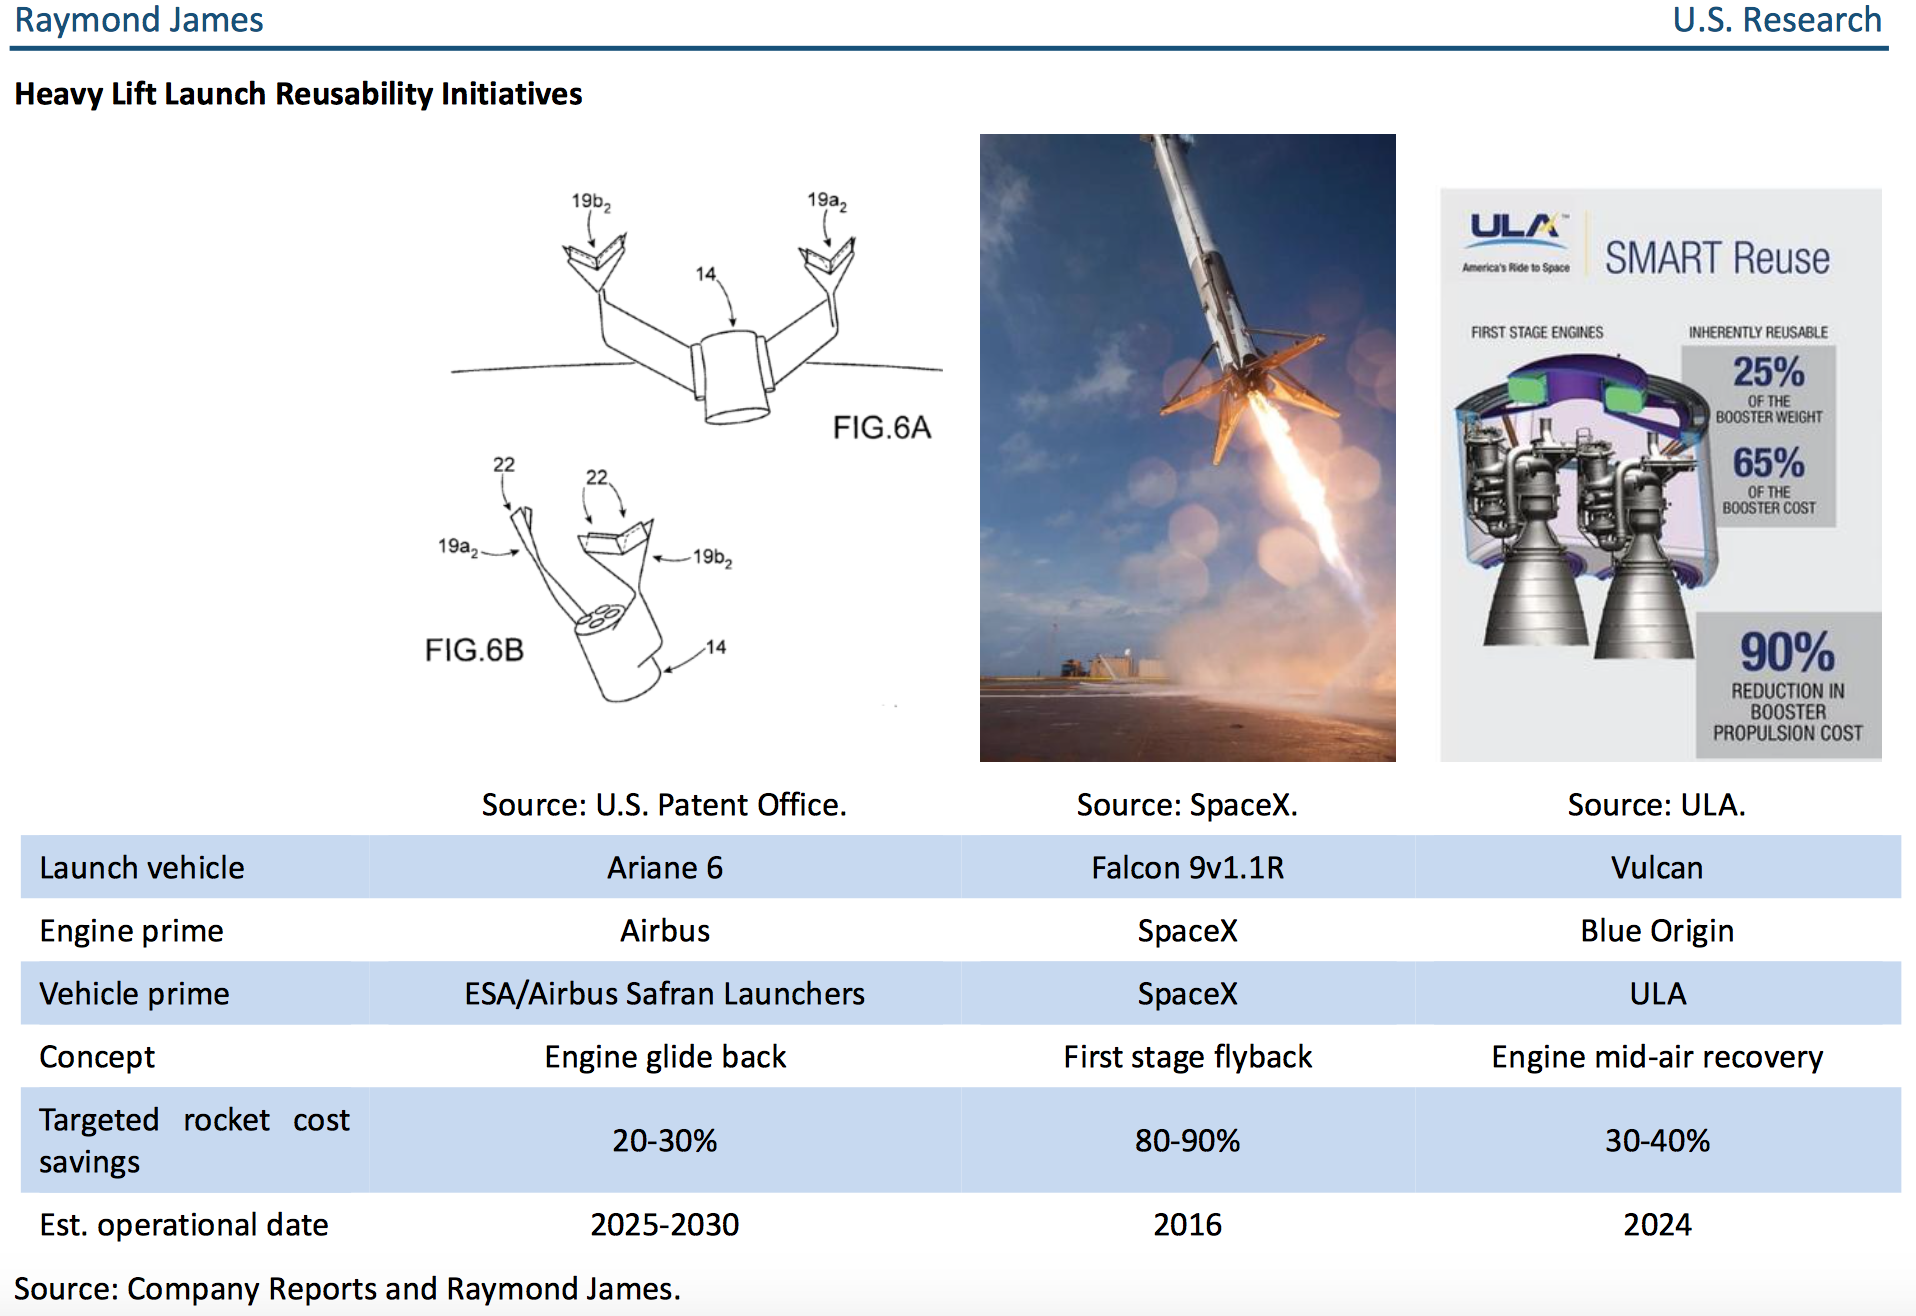 Figure 1: This table by Raymond James shows 3 of many reusability concepts currently under consideration or development. There is also Skylon, an air-breathing single-stage-to-orbit (SSTO) spaceplane that makes use of a novel engine cycle called SABRE, the Baikal booster, a Russian proposal that would make use of wings for a horizontal landing, and Escape Dynamics' microwave-powered SSTO vehicle among many others. 